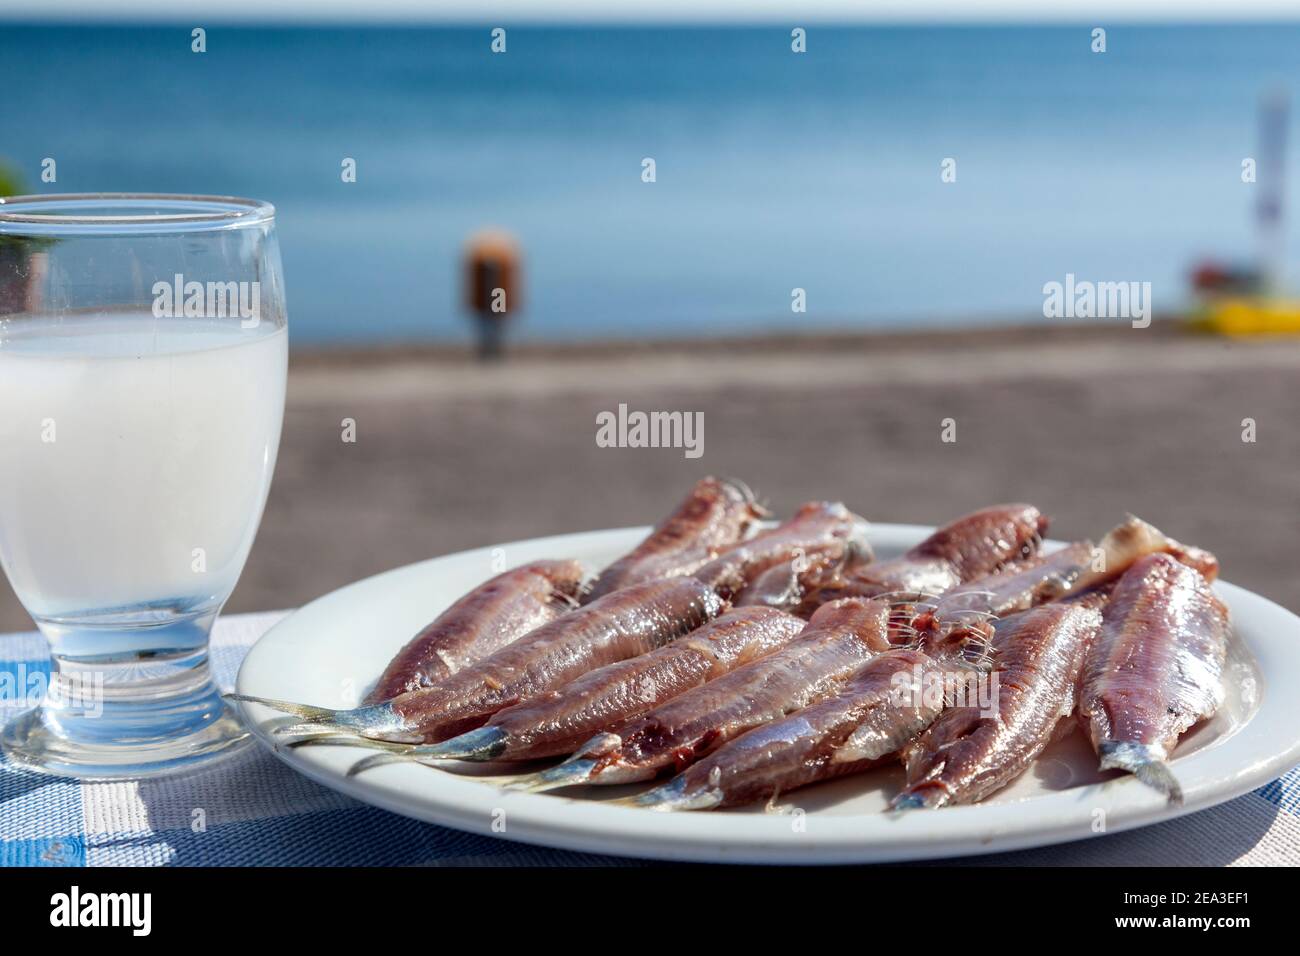 Salted sardines and ouzo drink, a popular fishery delicacy of Kalloni, Lesvos island, Greece, recognised as Product of Protected Designation of Origin Stock Photo